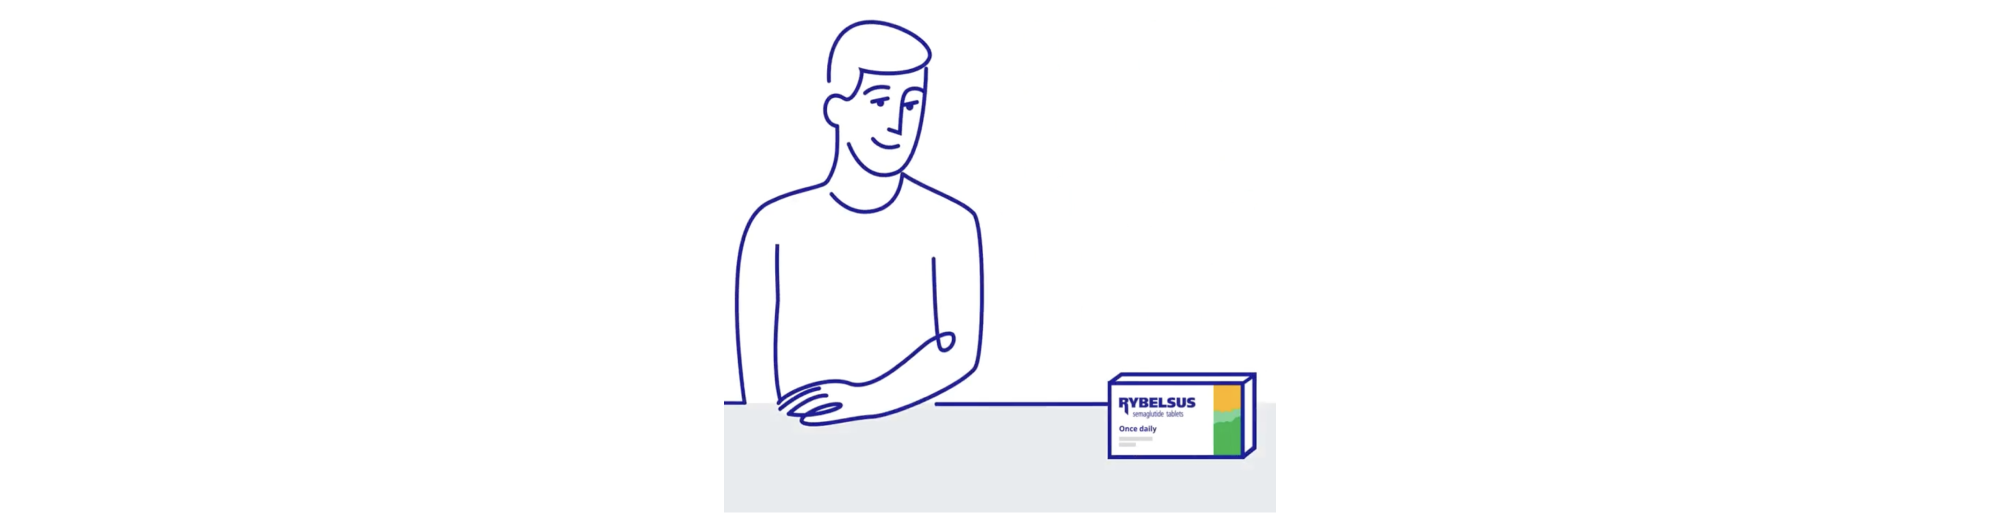 Get your patient started on RYBELSUS®